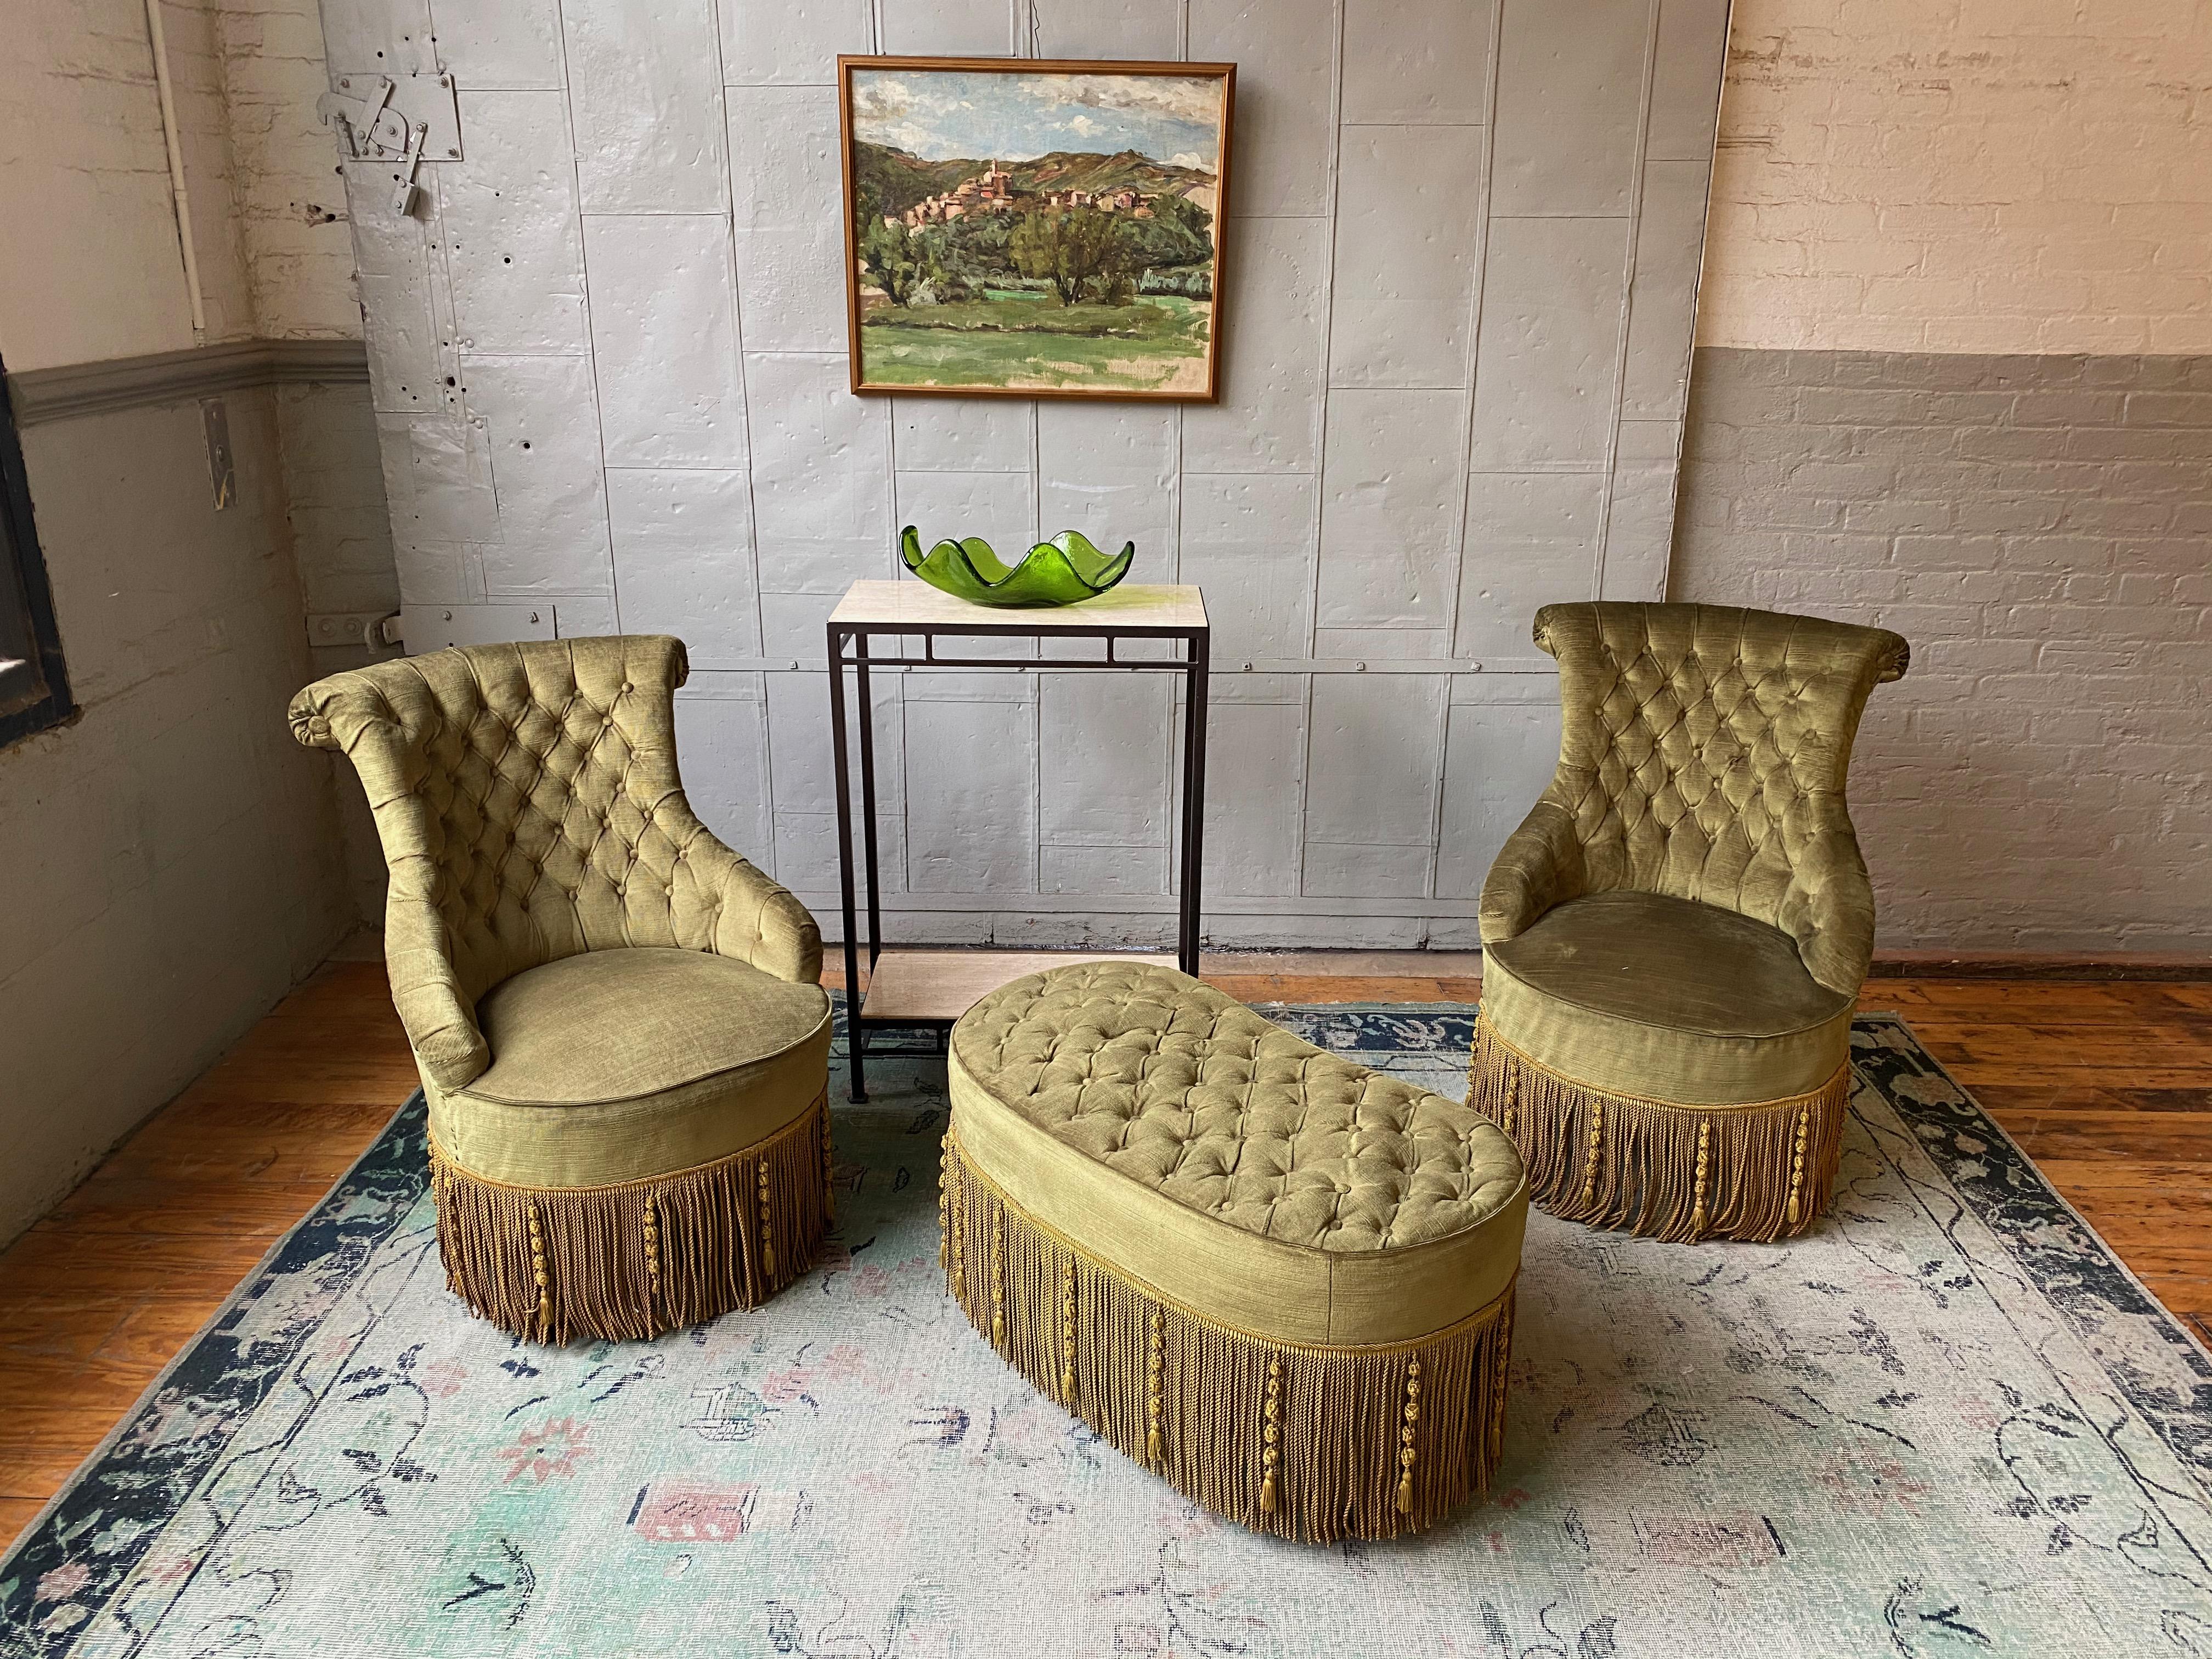 Pair of tufted Napoleon III style armchairs in green velvet with contrasting bullion fringe. The pair of chairs are sold with a matching ottoman. 

French late 19th or early 20th century.  The set is in good condition and sold as is.